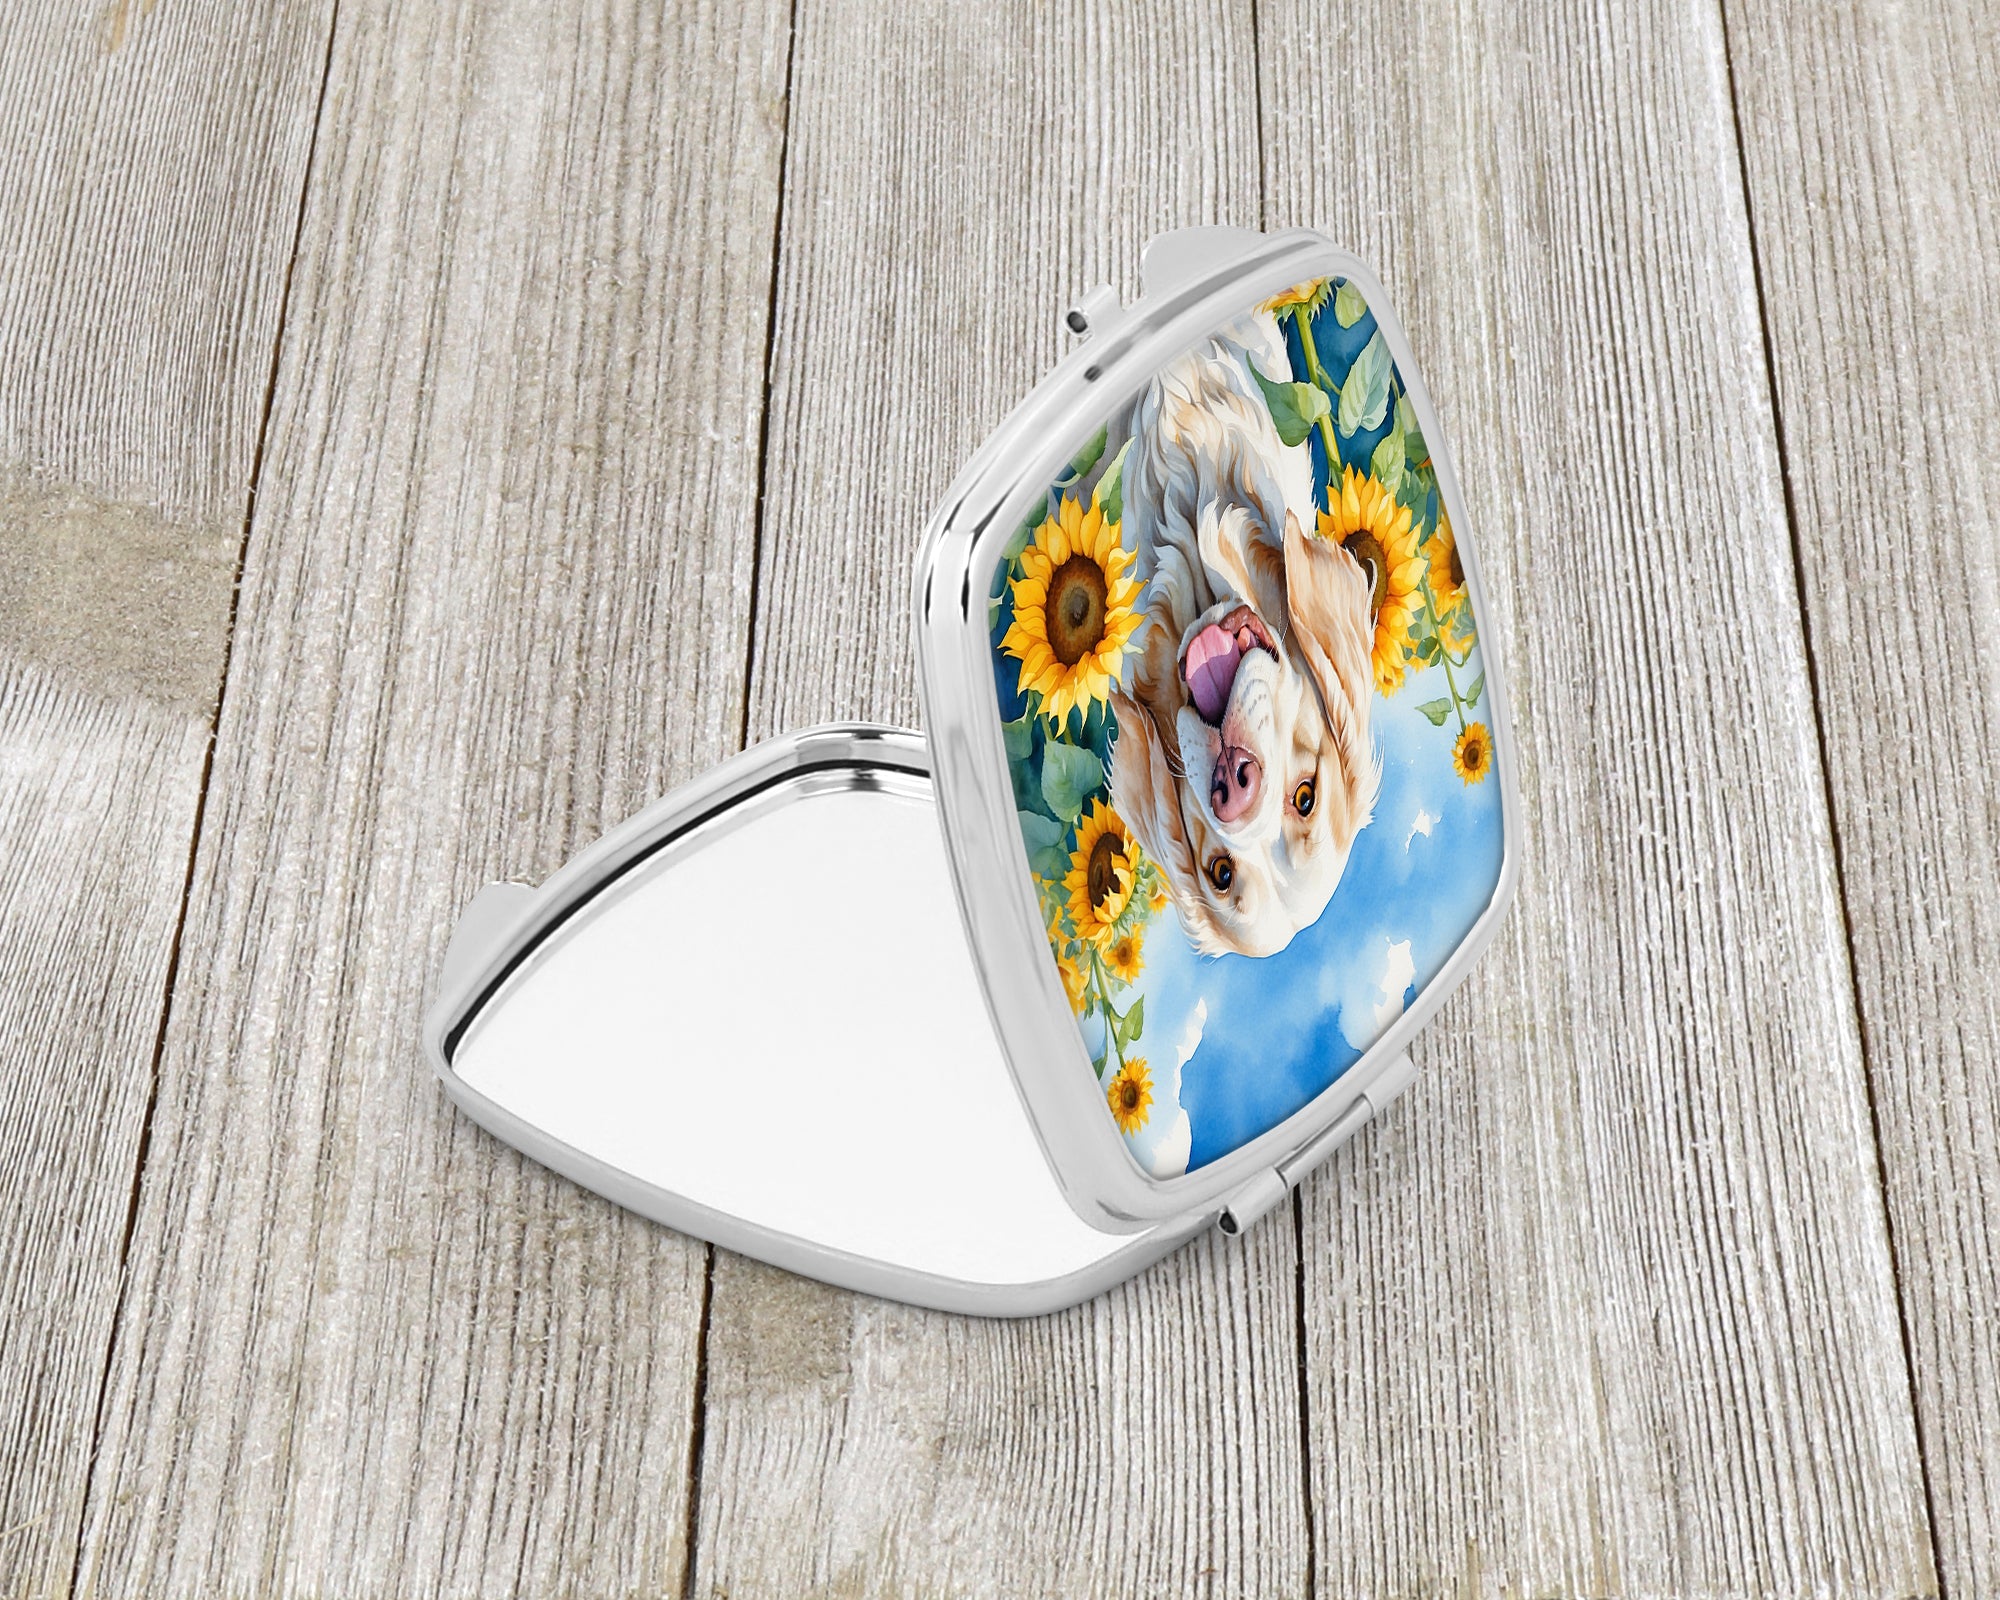 Buy this Clumber Spaniel in Sunflowers Compact Mirror